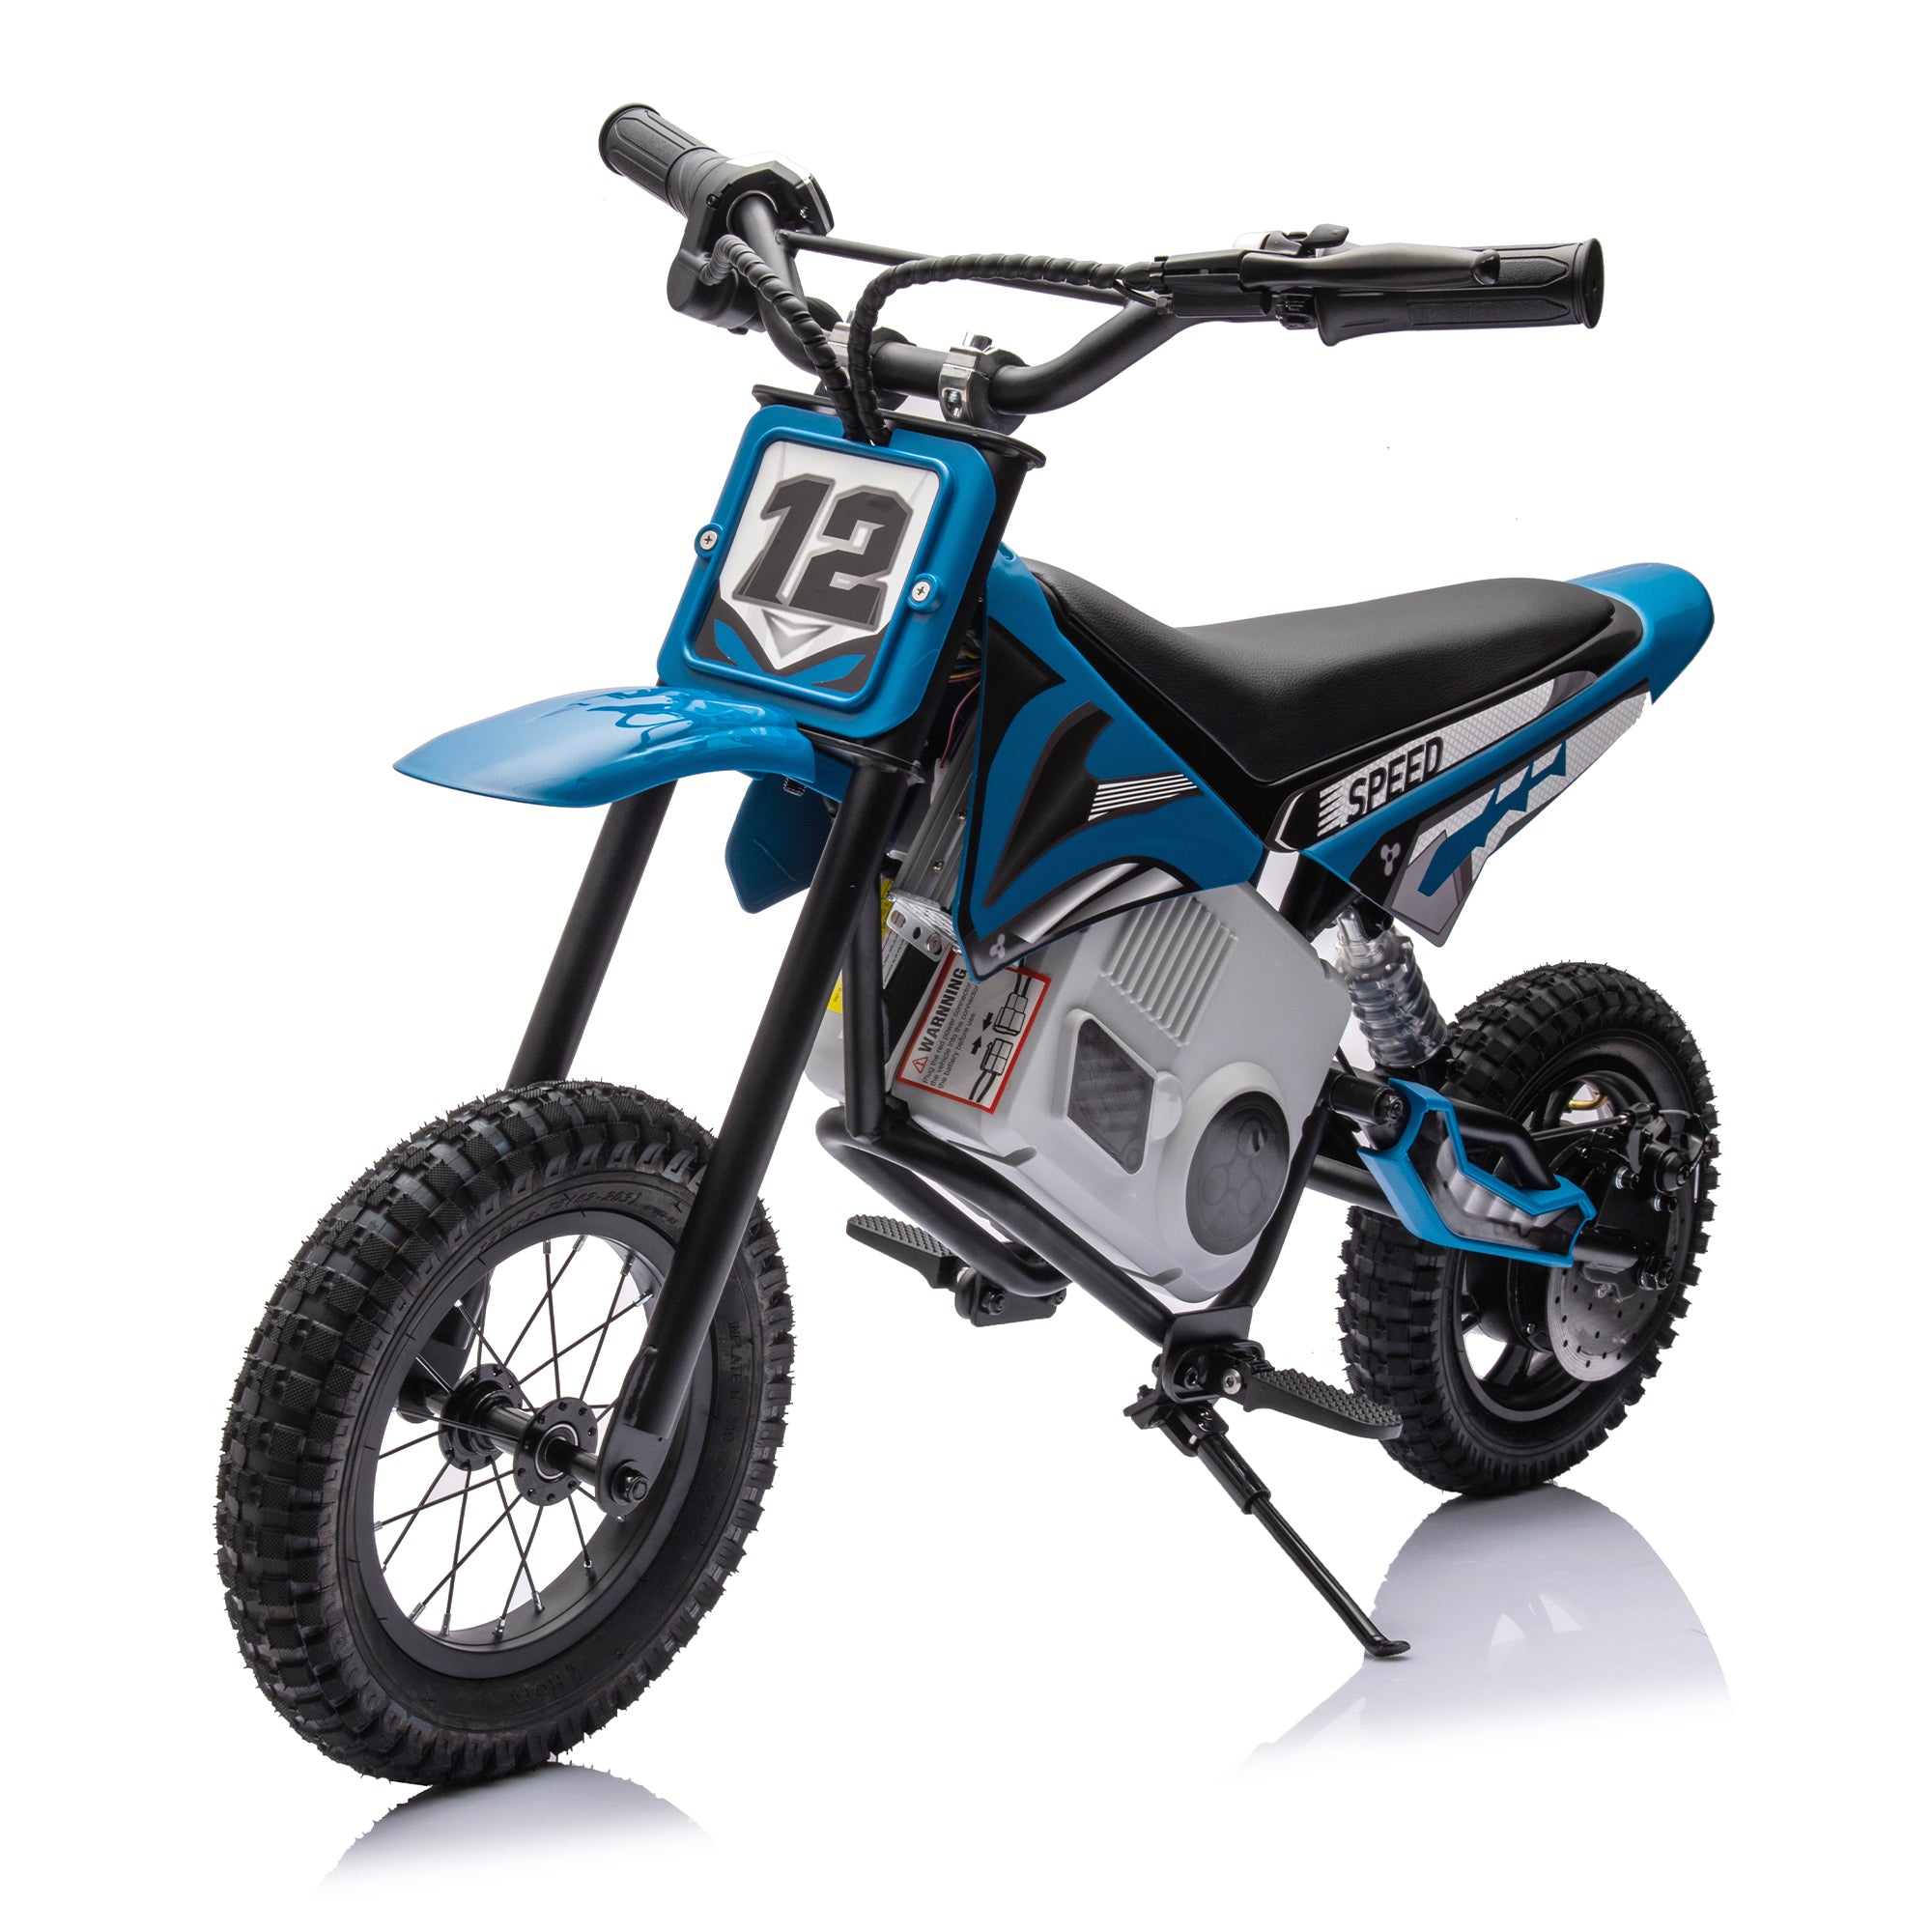 🆓🚛 36V Electric Mini Dirt Motorcycle for Kids, 350W Xxxl Motorcycle, Stepless Variable Speed Drive, Disc Brake, No Chain, Steady Acceleration, Horn, Power Display, Rate Display, 176 Pounds for 50M Or More, Age 14+, Blue